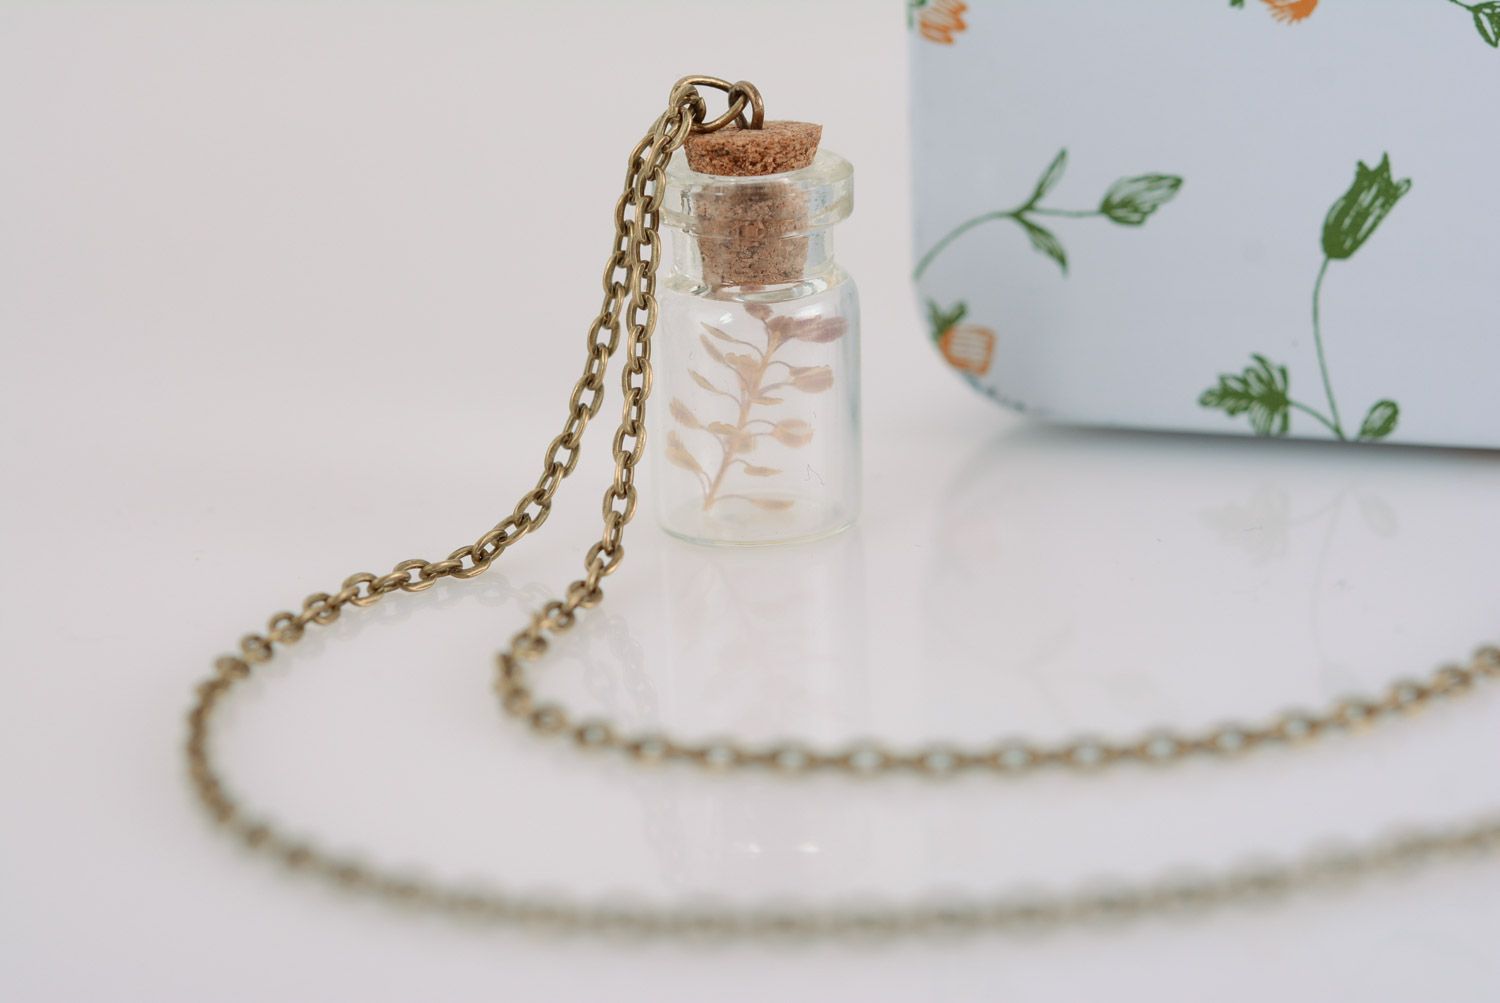 Handmade glass neck pendant in the shape of jar with plant inside with long chain photo 3